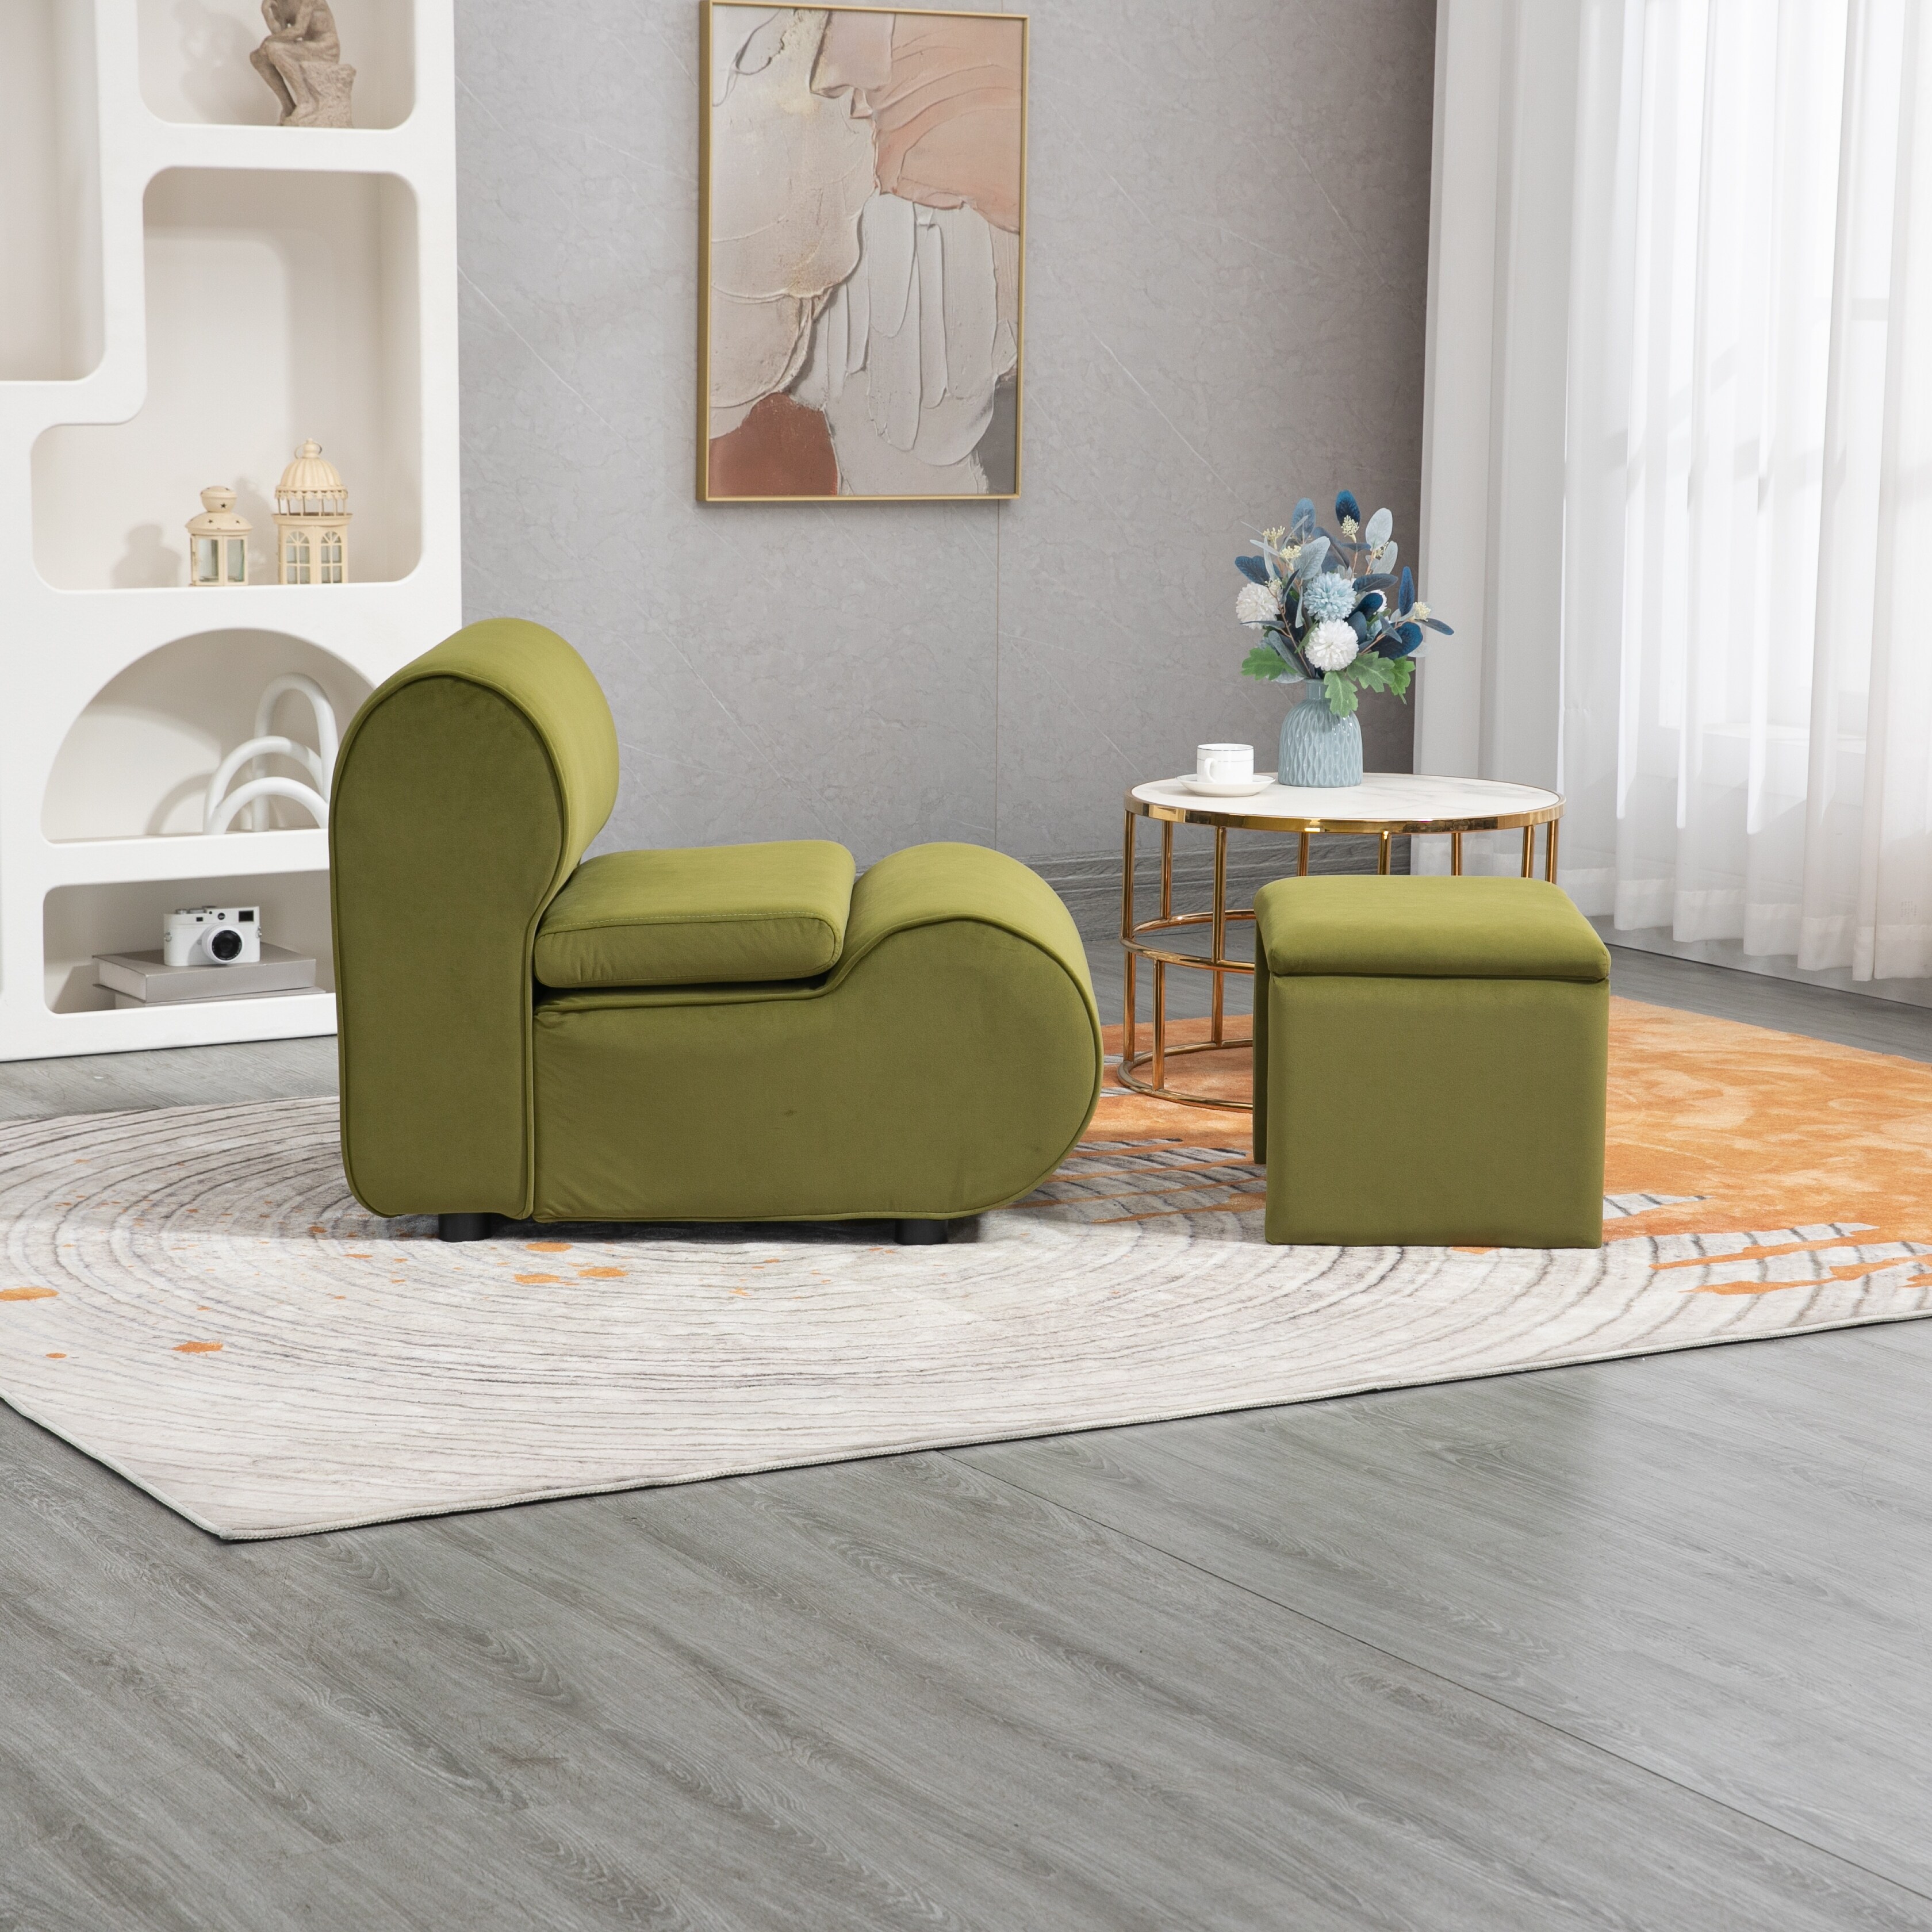 https://ak1.ostkcdn.com/images/products/is/images/direct/eac360358b0d30db8d46a7345a0cb9411833a446/Cushioned-deep-seat-Accent-Chair-with-Ottoman-for-Living-Room.jpg